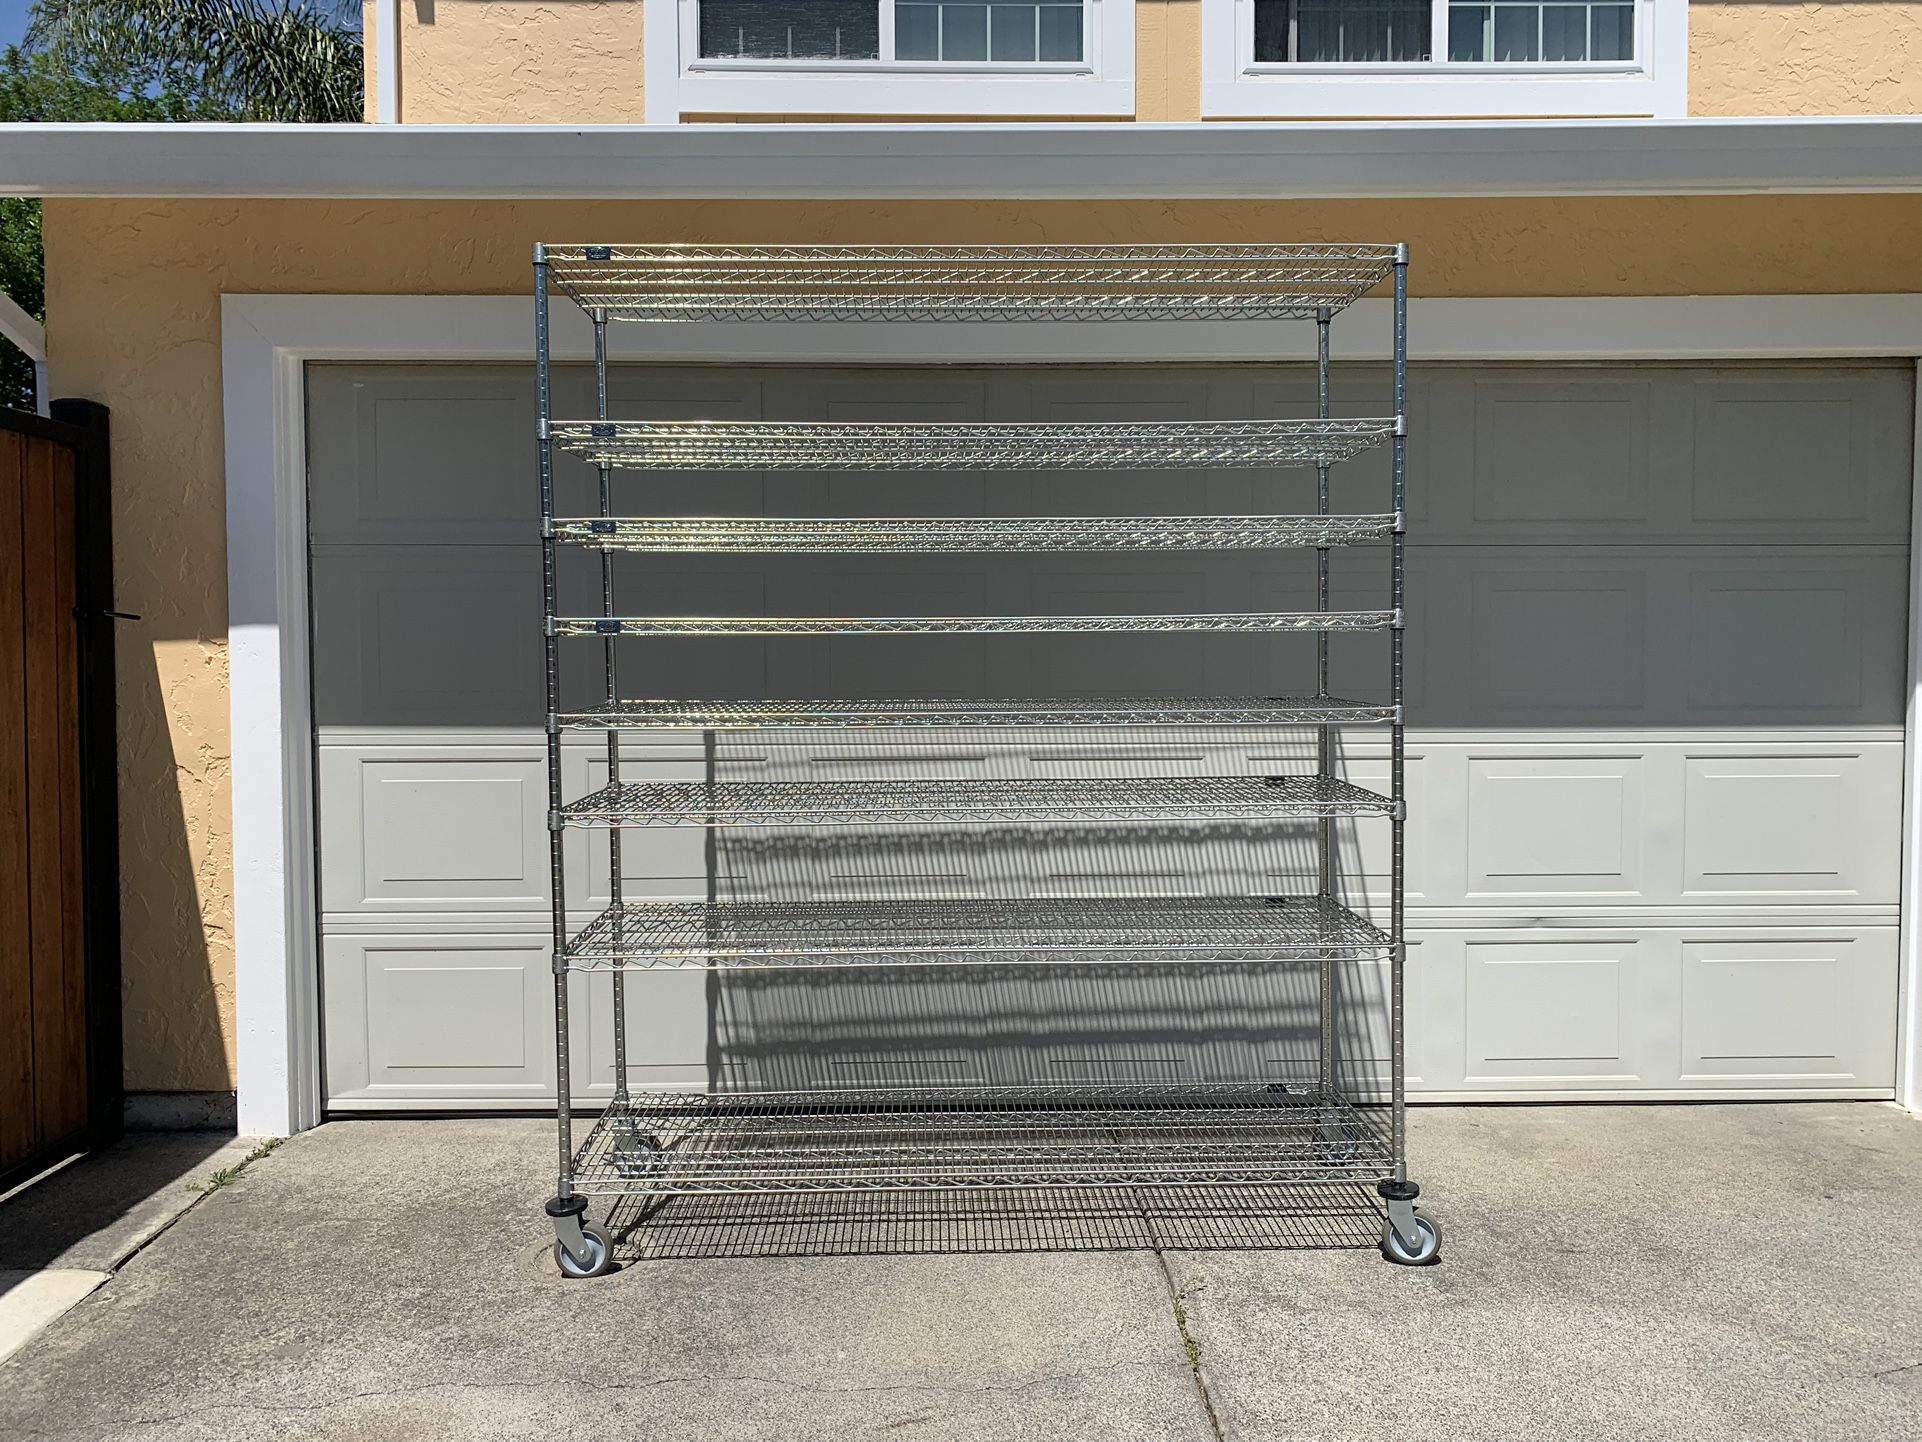 Stainless Steel Wire Shelving Unit On Wheels